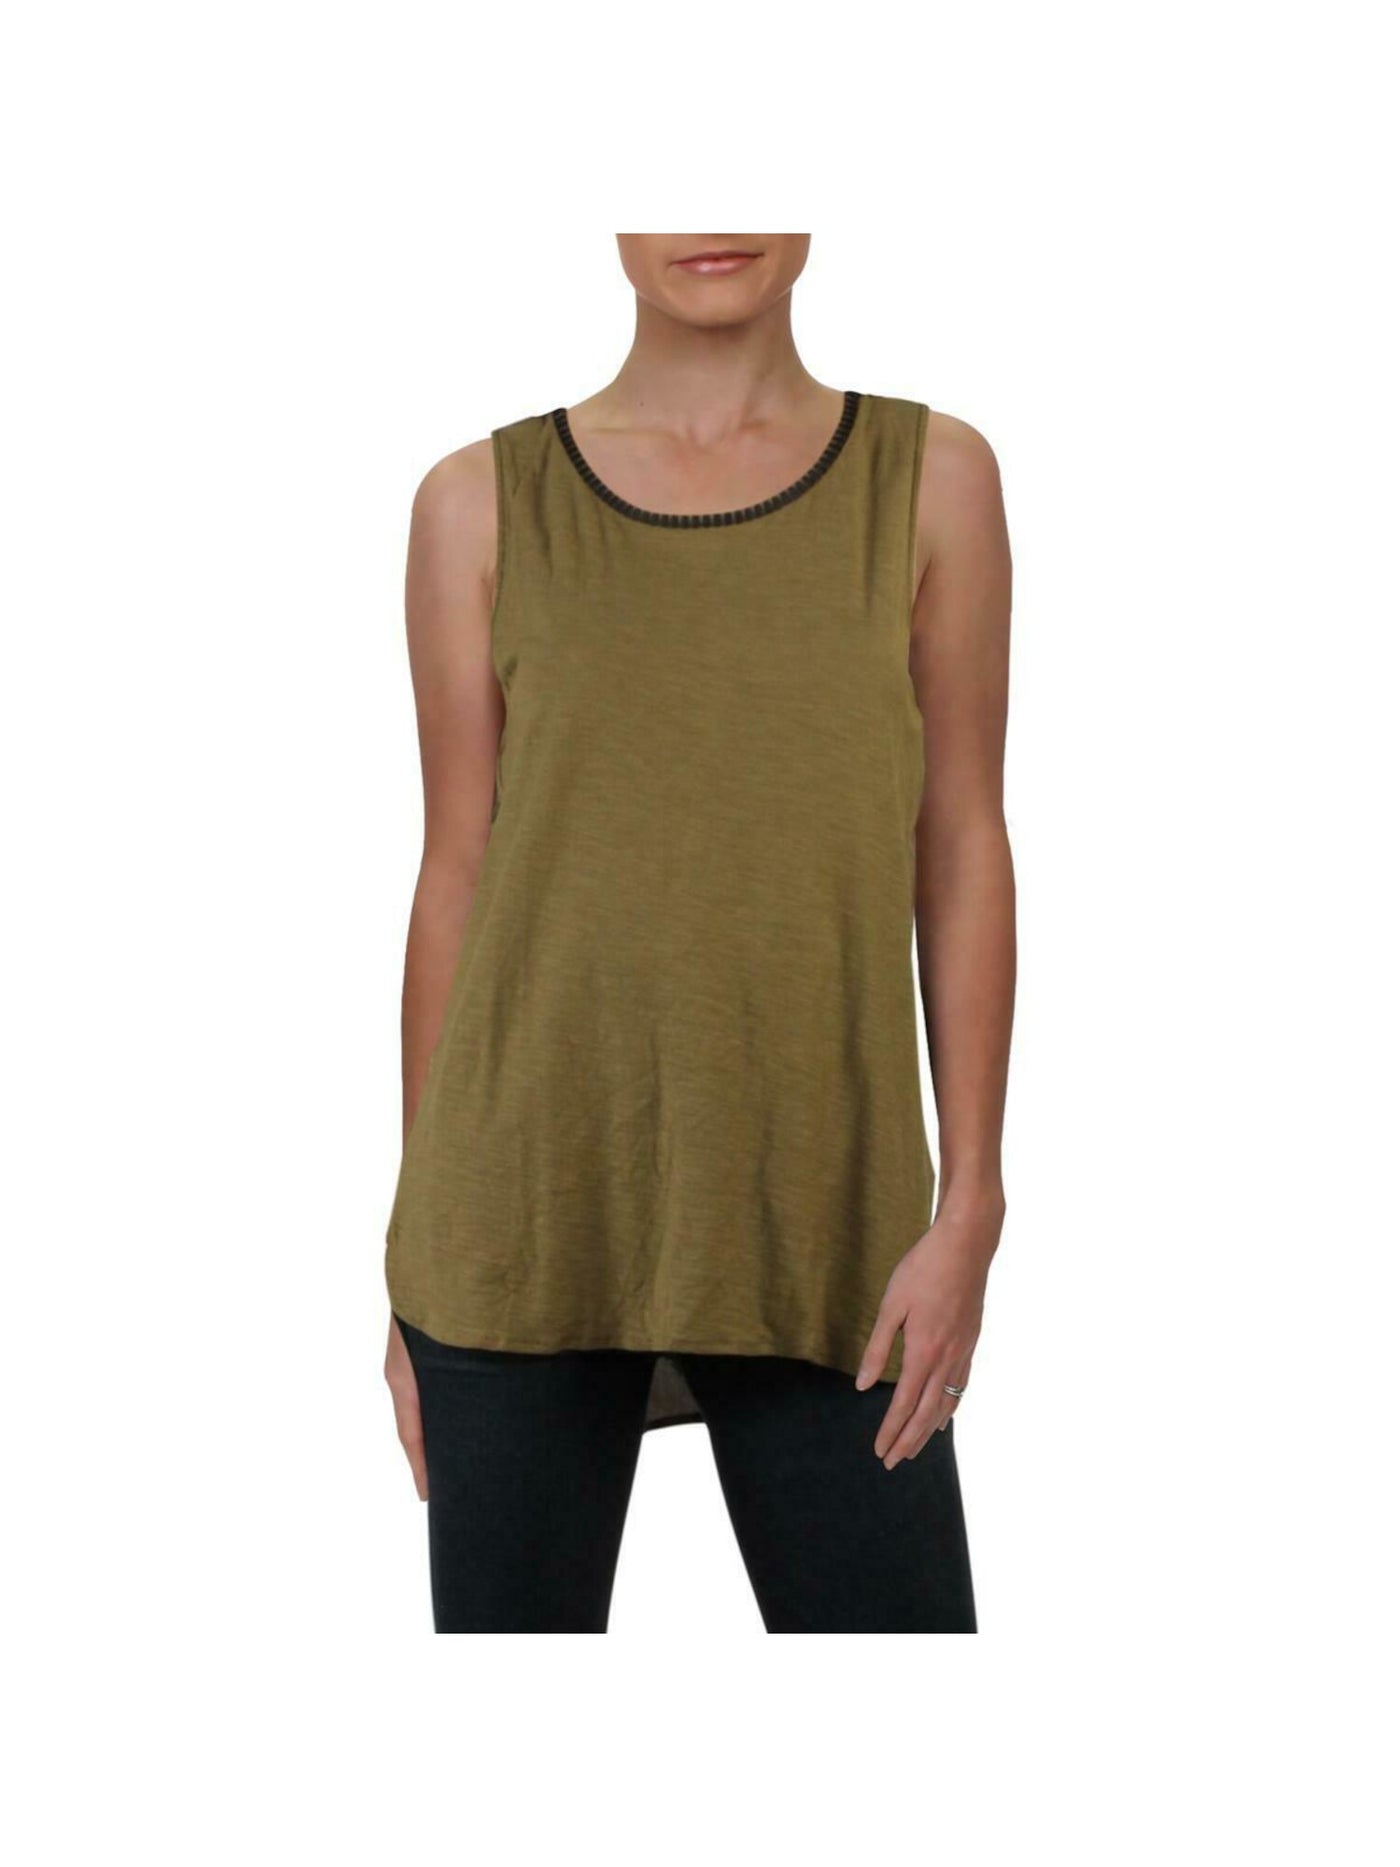 VINCE CAMUTO Womens Green Sleeveless Jewel Neck Top Size: S